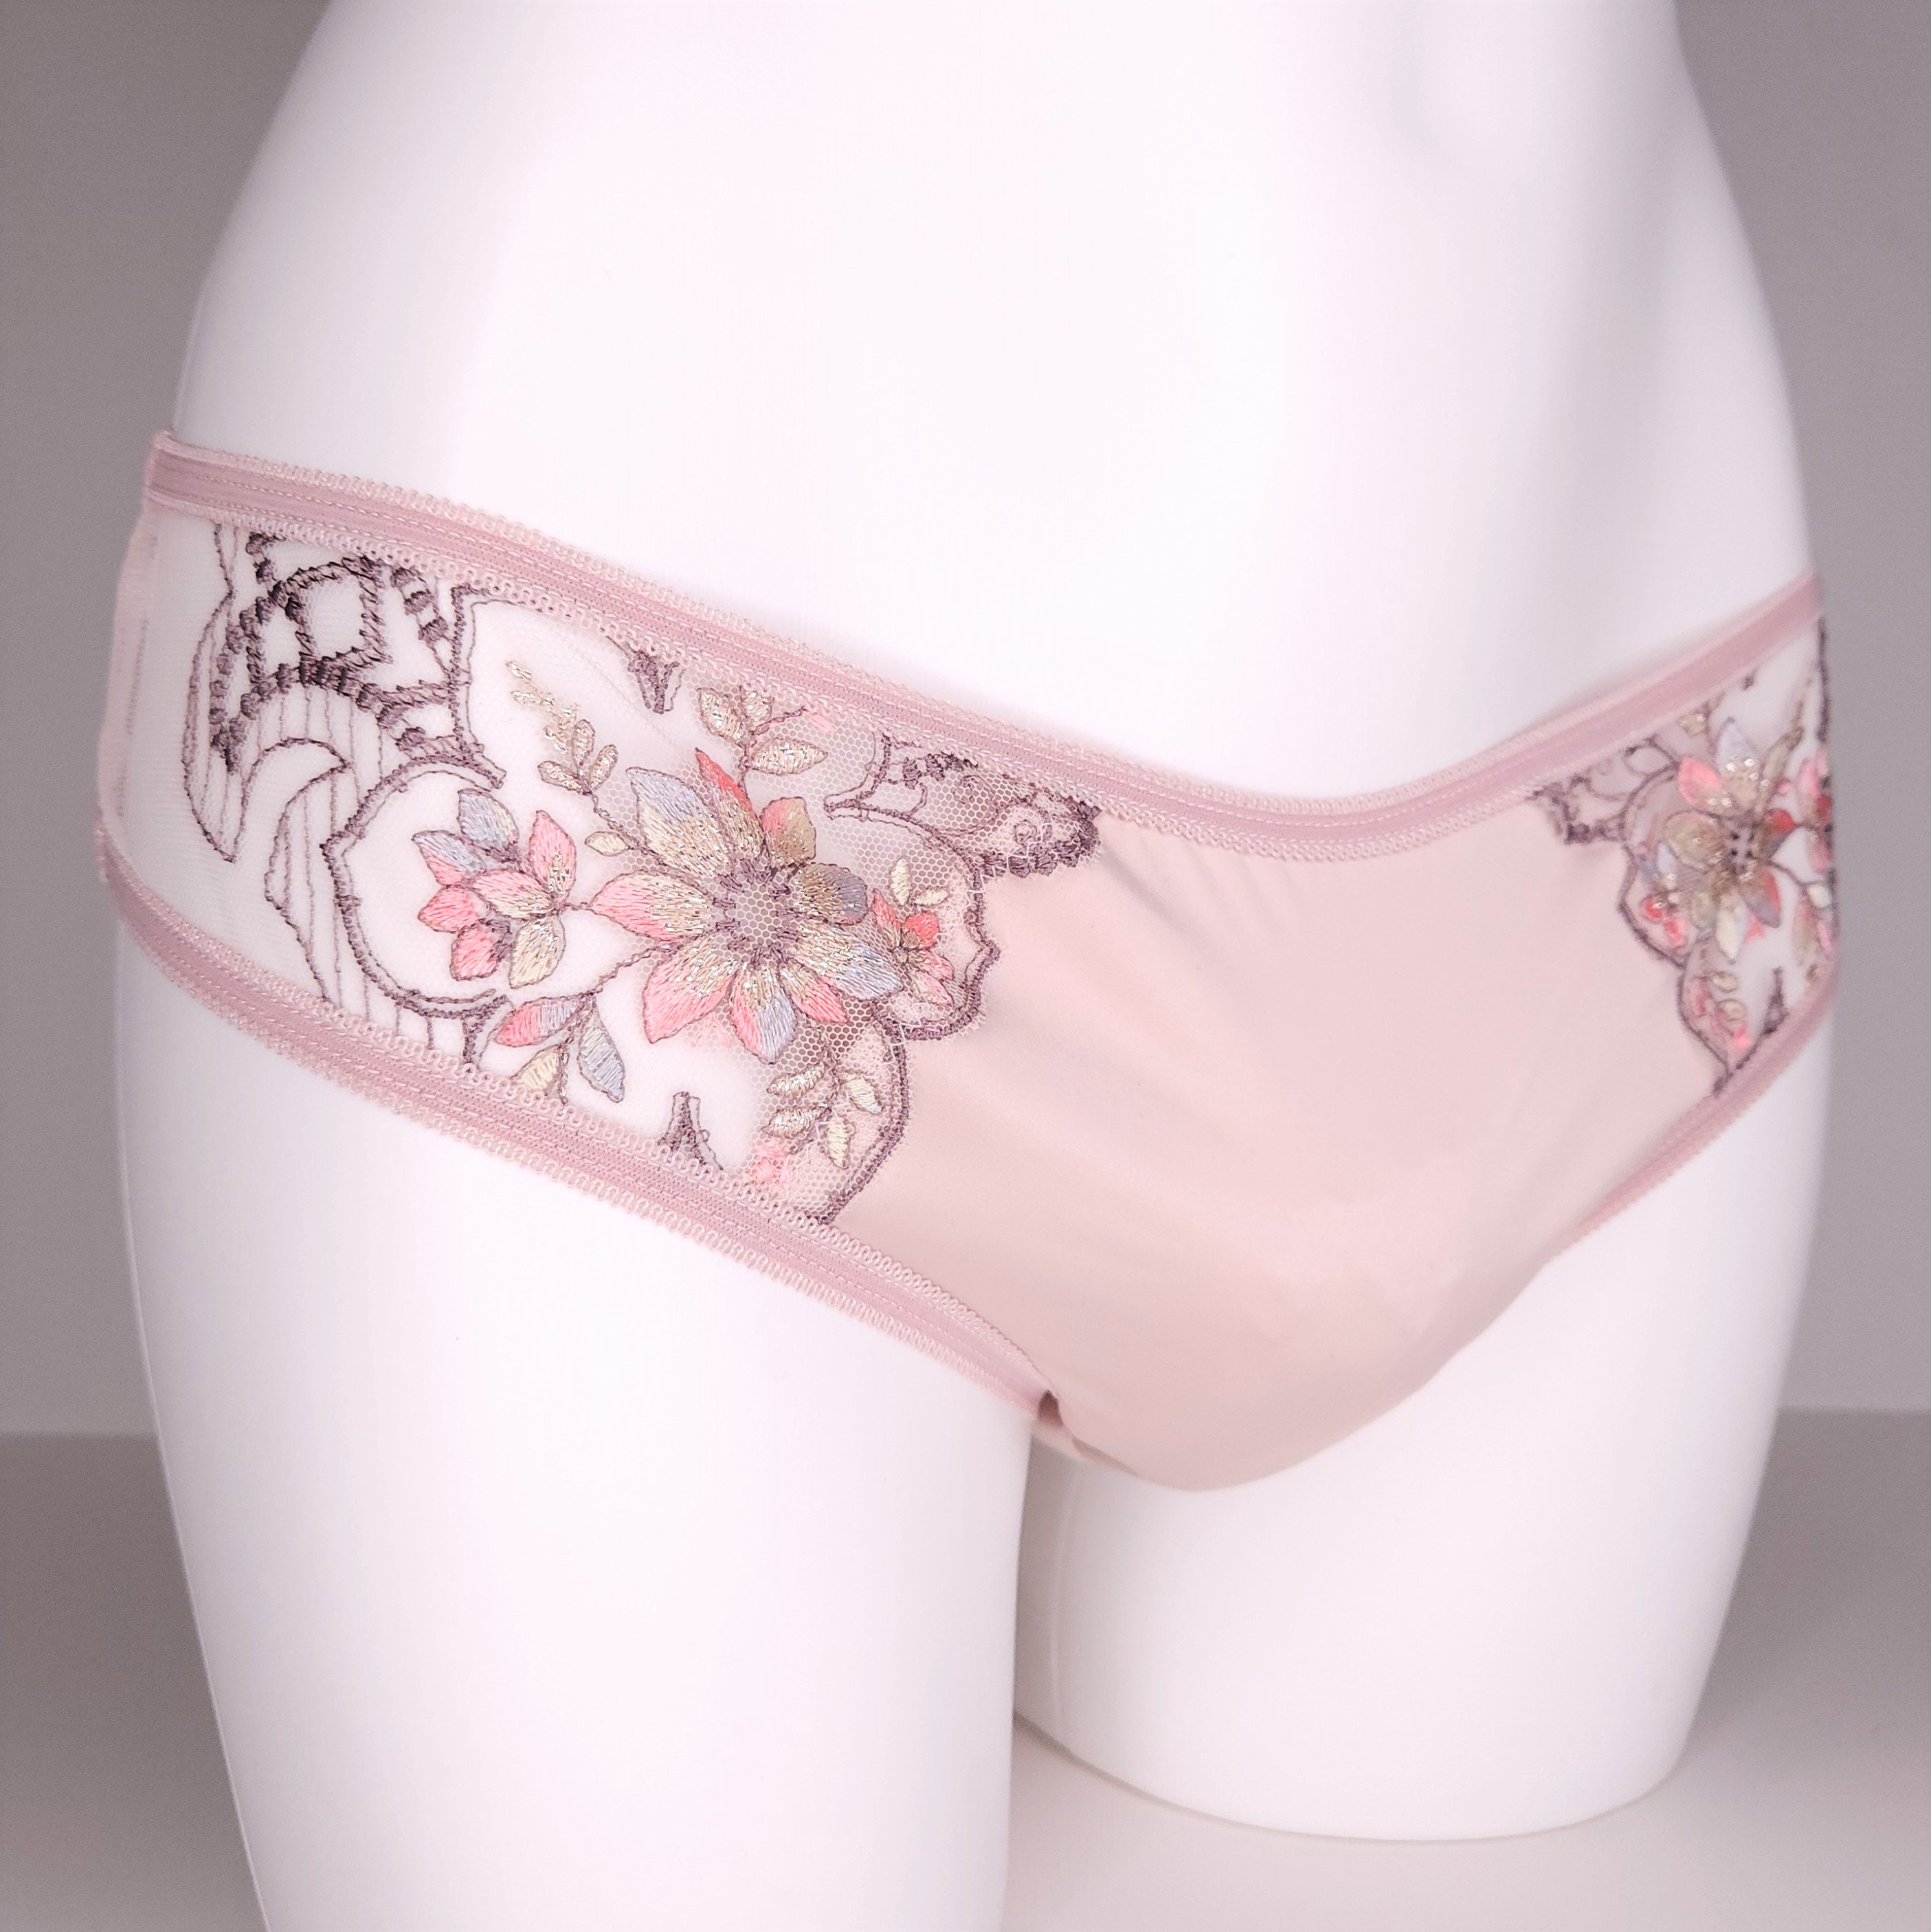 Cream Satin Frilly Knickers – Chic Petit